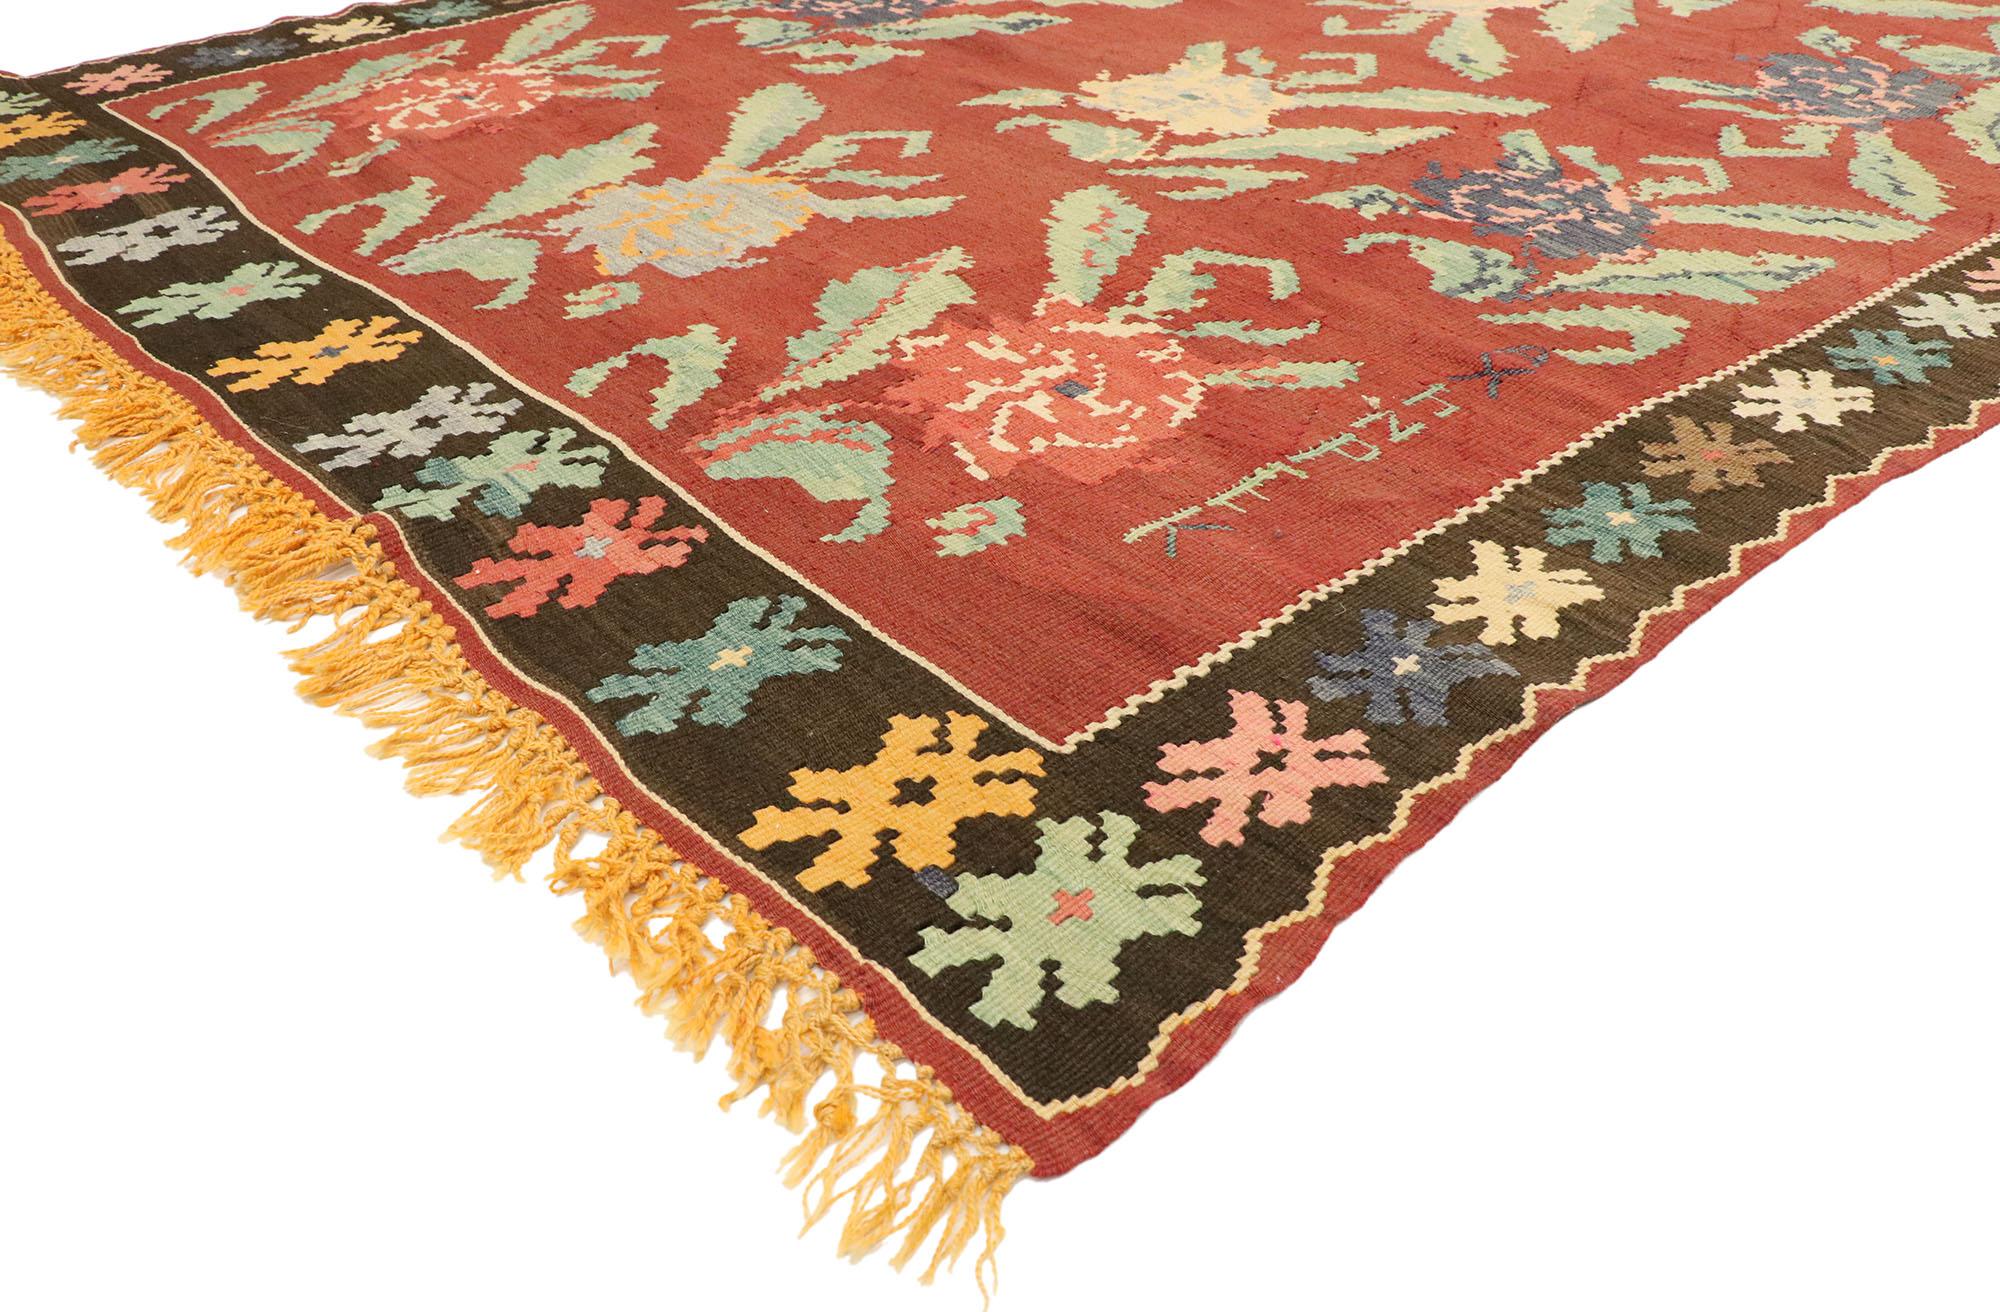 72090 Vintage Floral Turkish Kilim Rug, 06’09 x 09’06. Turkish Kilim rugs with Bessarabian Rose designs are a distinct style of Kilim rugs crafted in Turkey, featuring floral motifs inspired by the historical Bessarabian rose designs originating